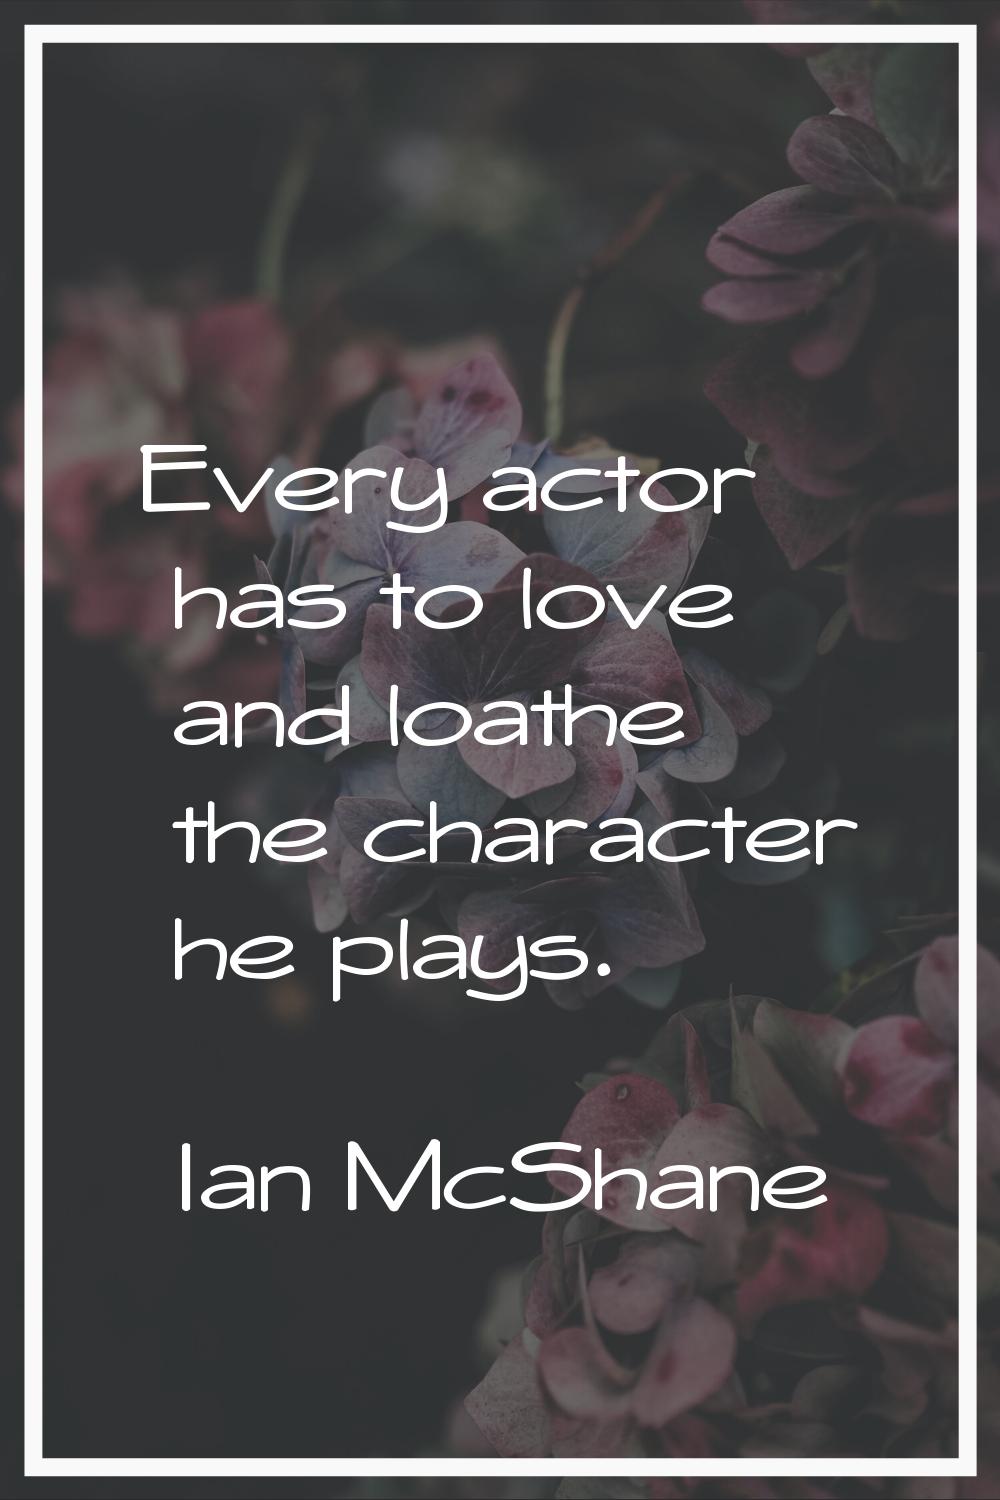 Every actor has to love and loathe the character he plays.